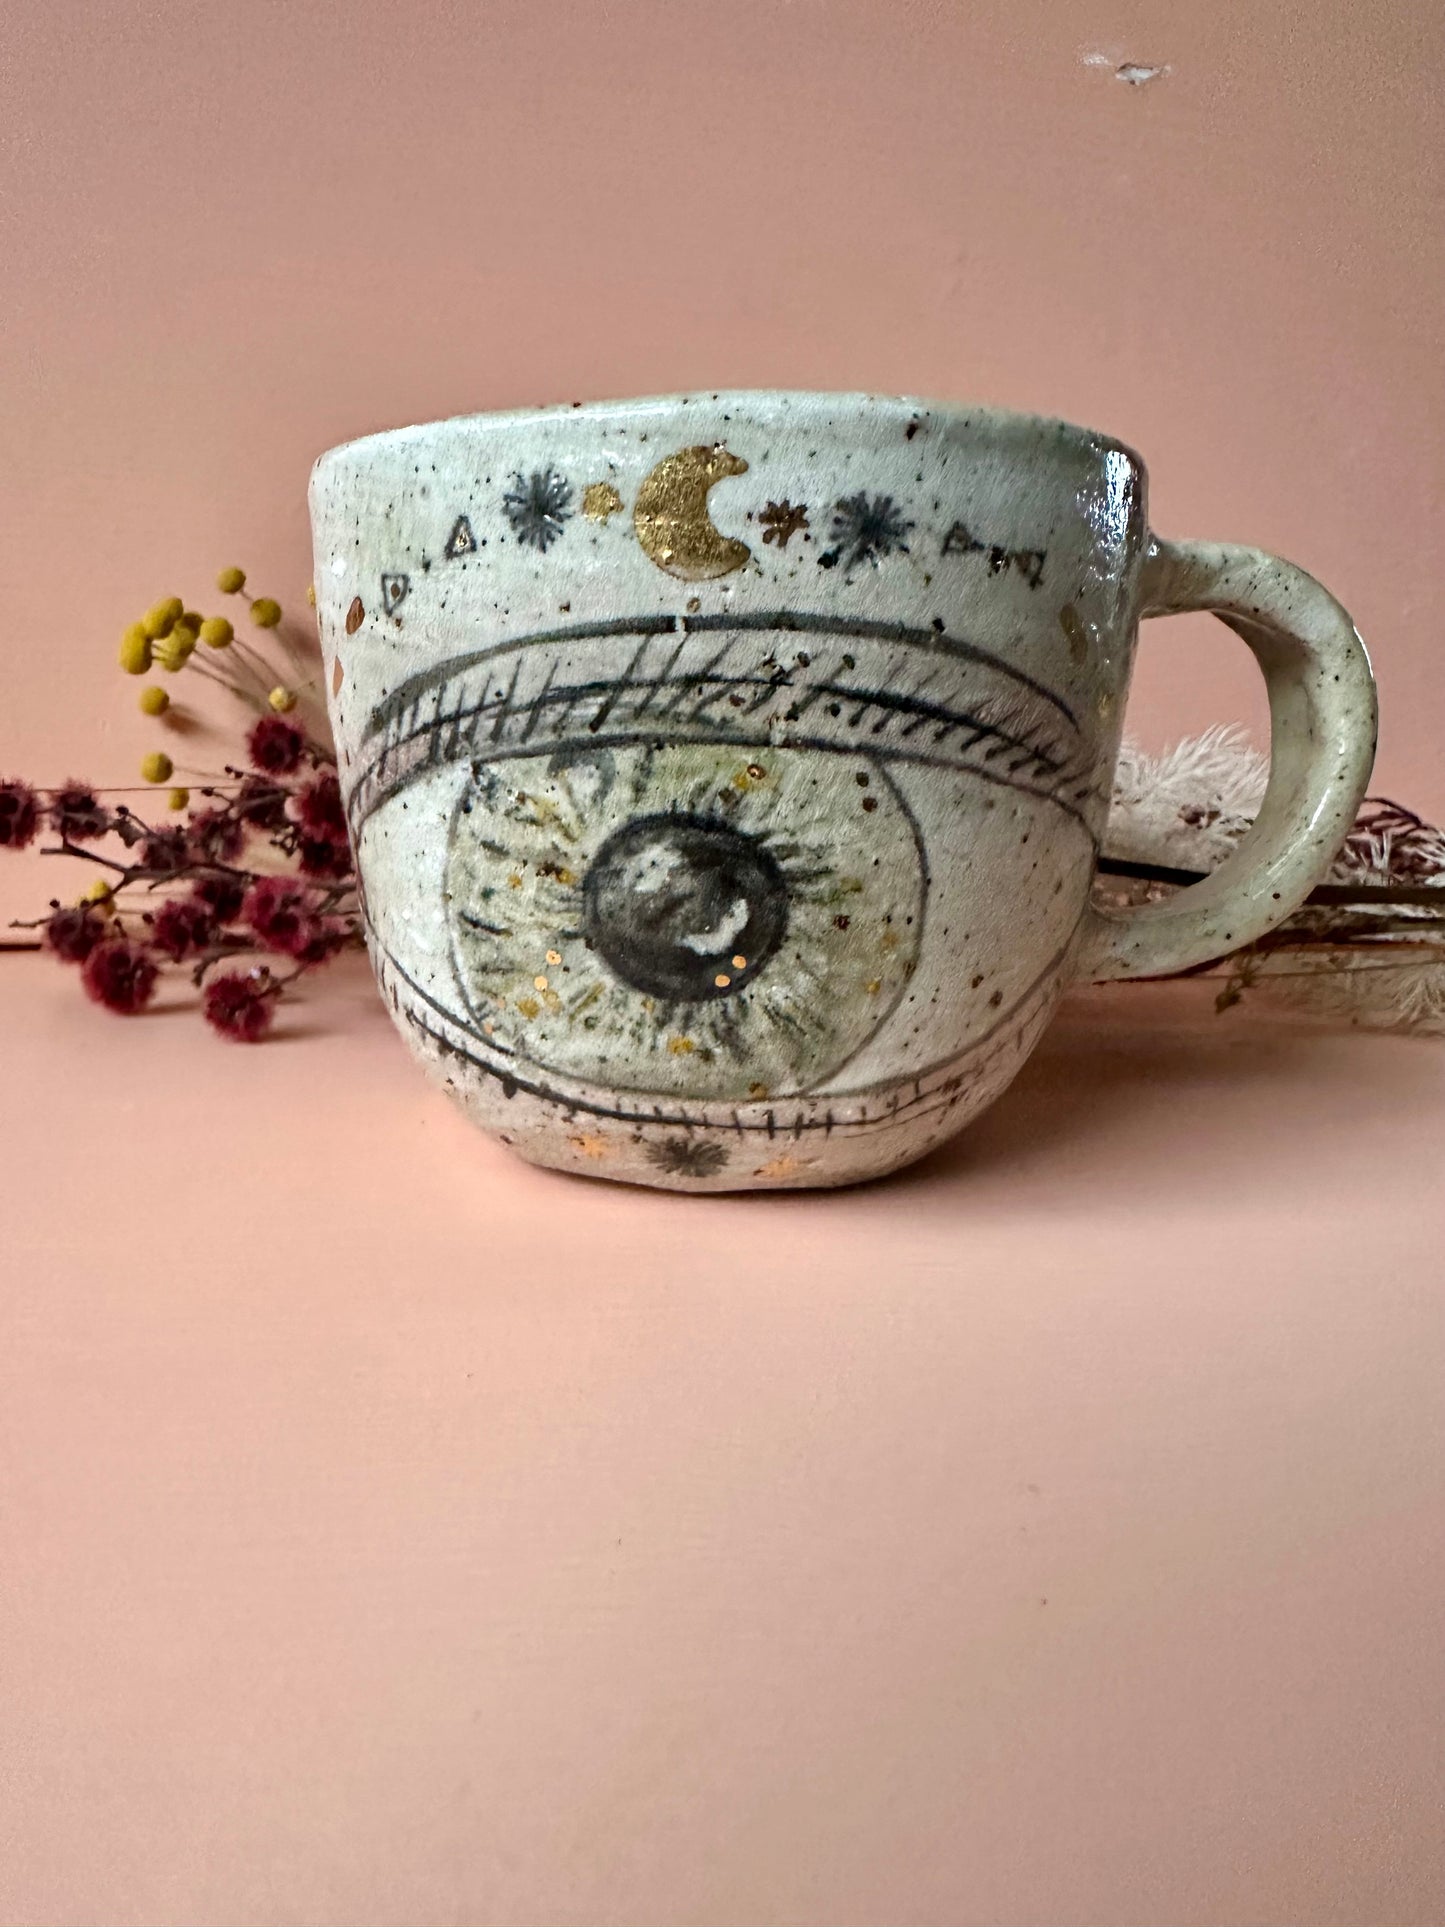 One ‘protective eye’ hand painted cup